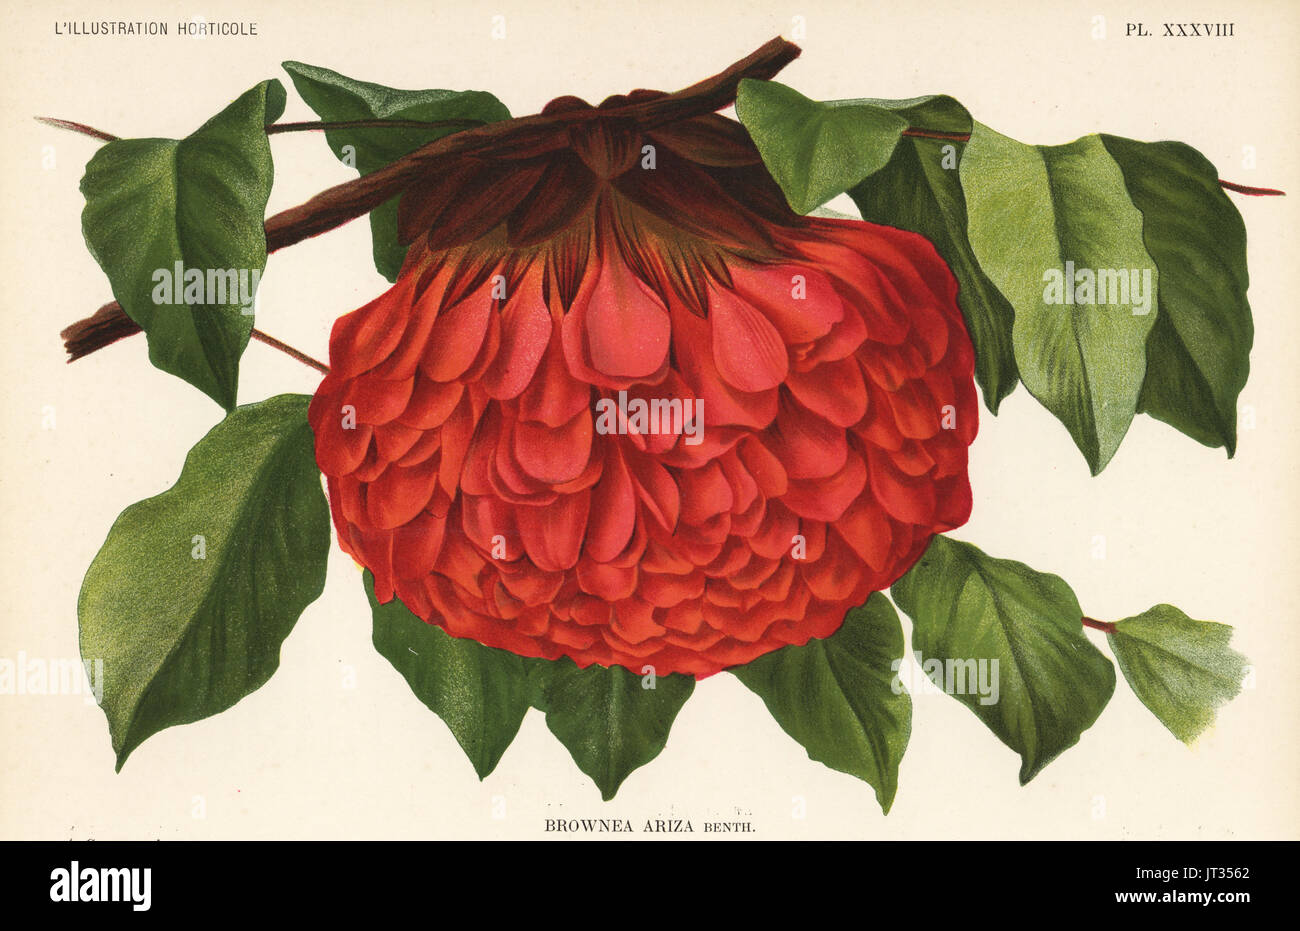 Brownea ariza. Chromolithograph by J. Goffart after an illustration by A. Goossens from Jean Linden's l'Illustration Horticole, Brussels, 1895. Stock Photo